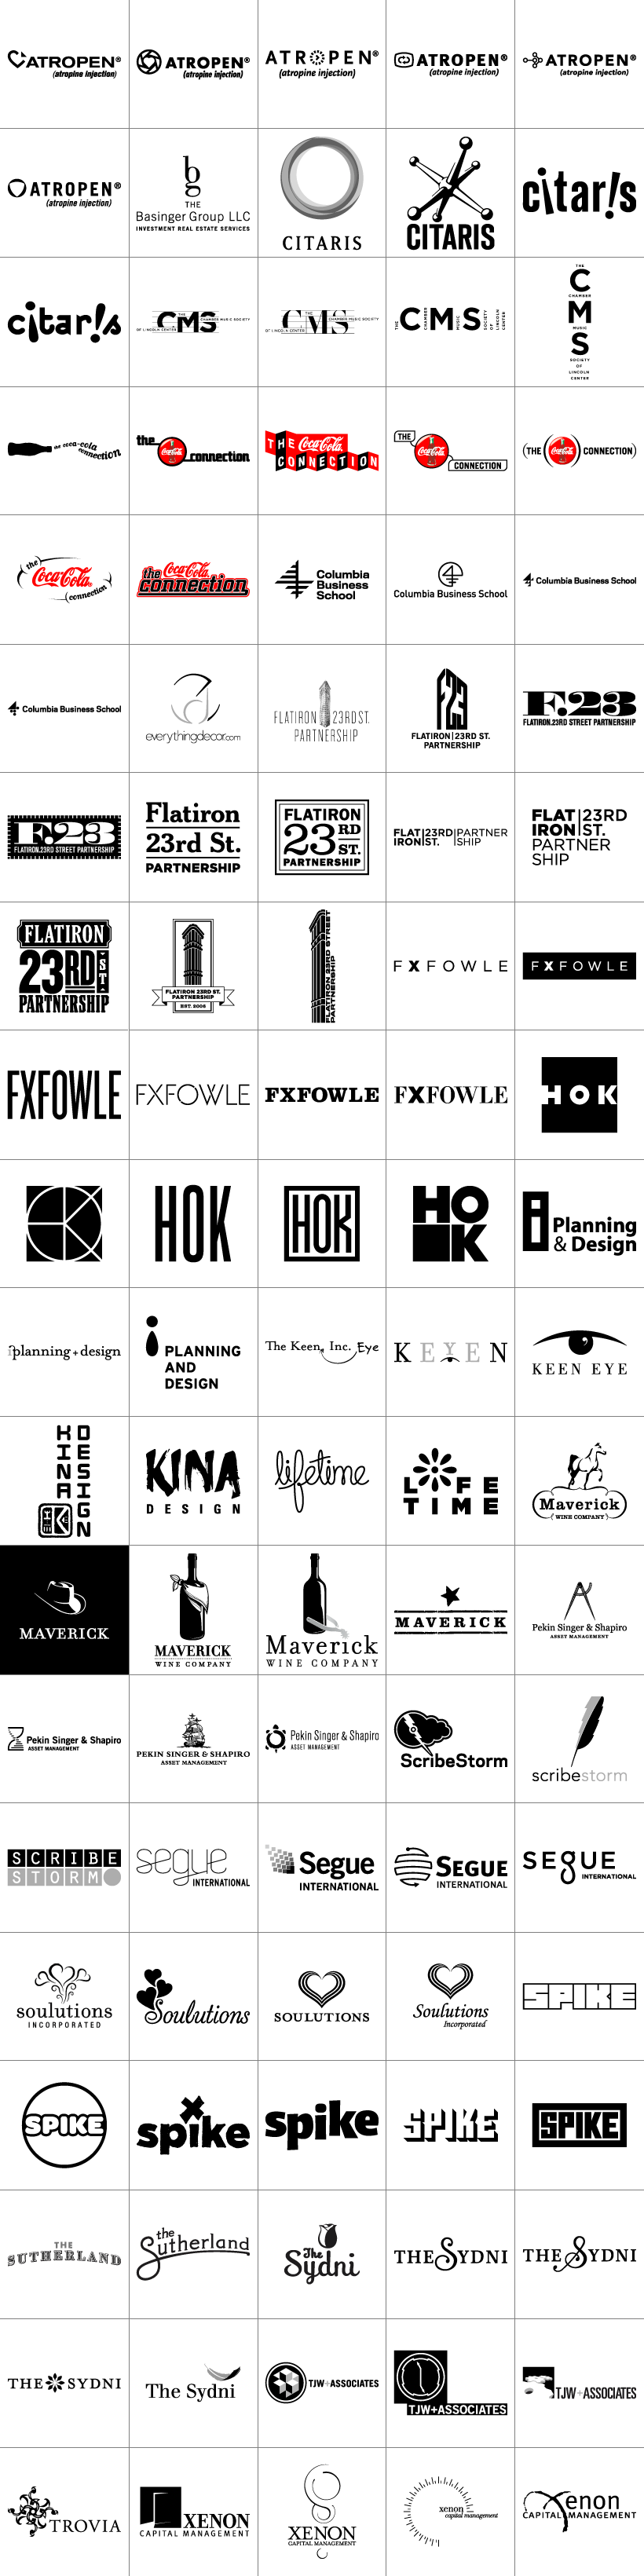 100 Pics Logo - Speak Up Archive: 100 Unused Logos and What they Reveal about my